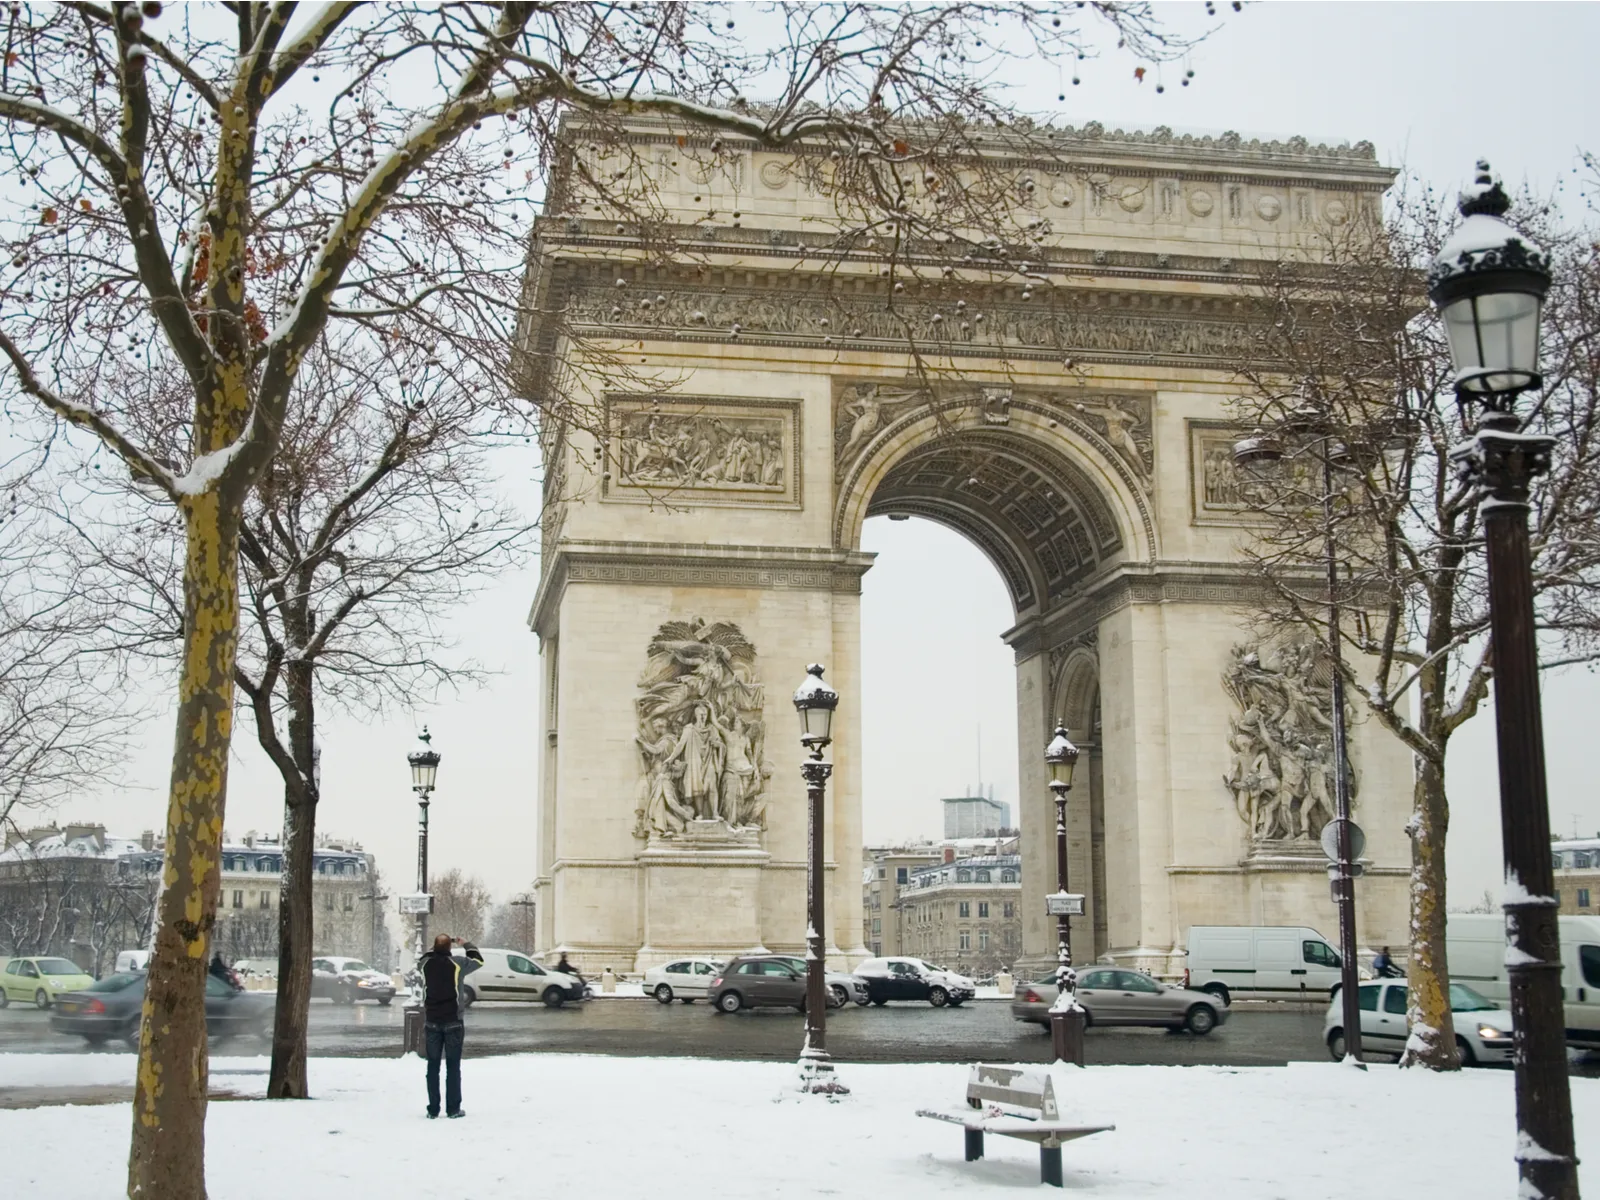 Arc de Triomphe as seen in the Winter during the worst time to visit Europe